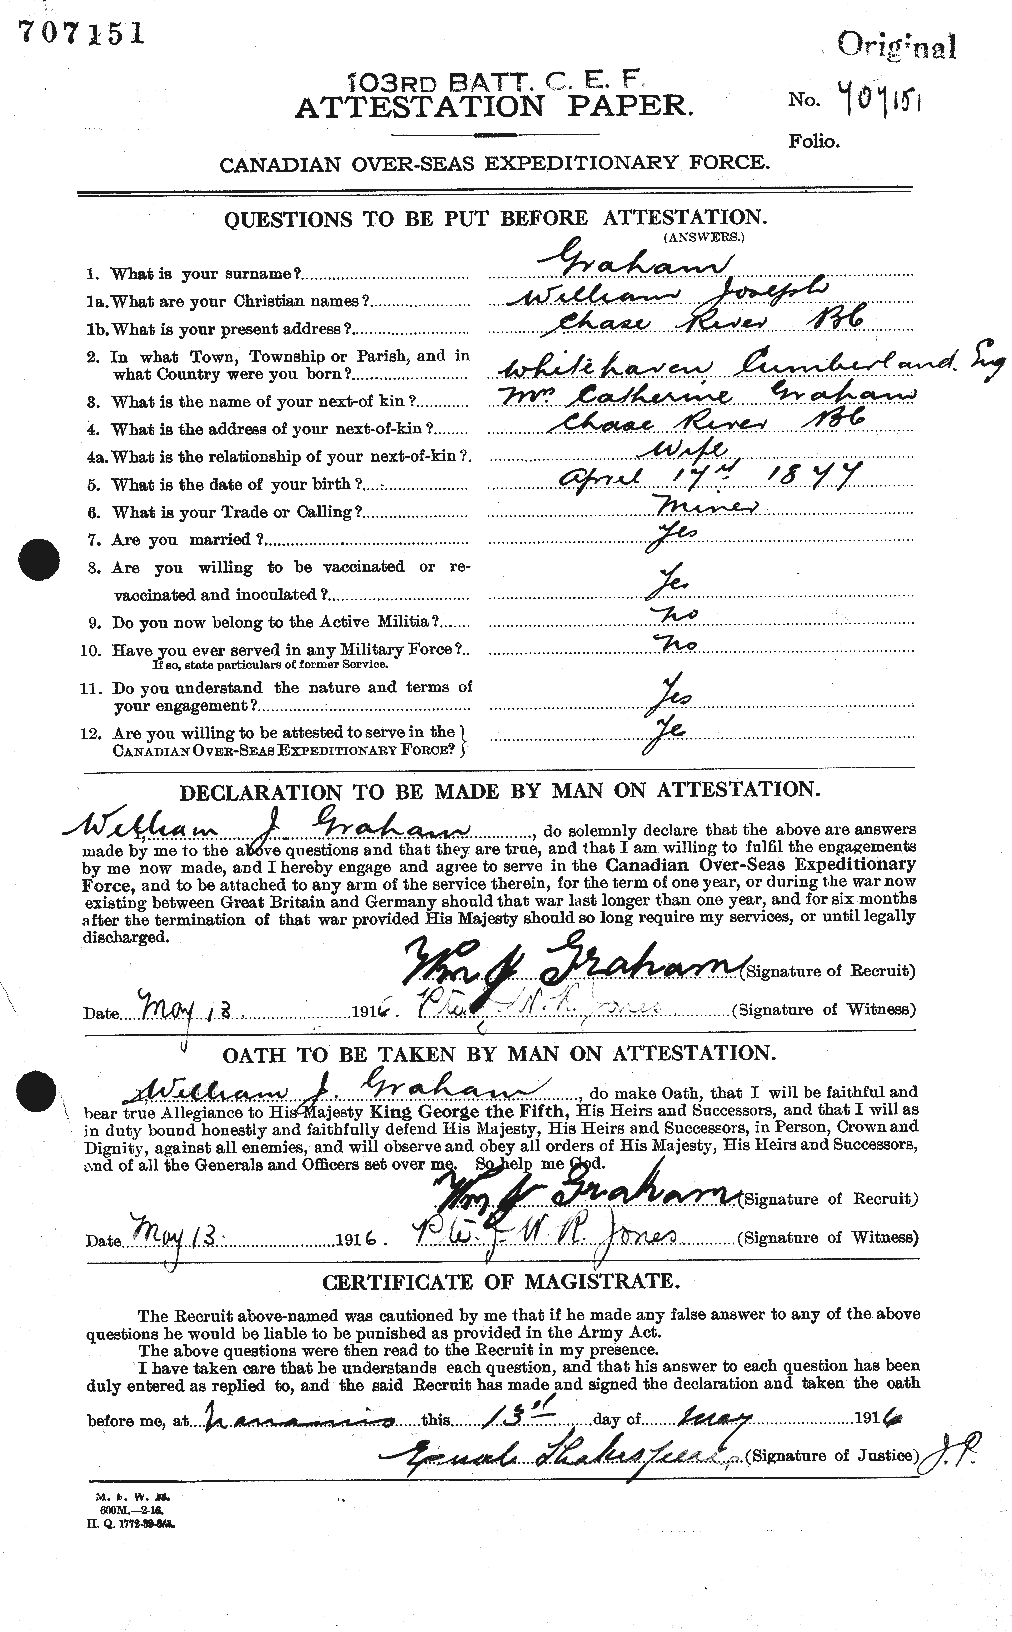 Personnel Records of the First World War - CEF 358016a